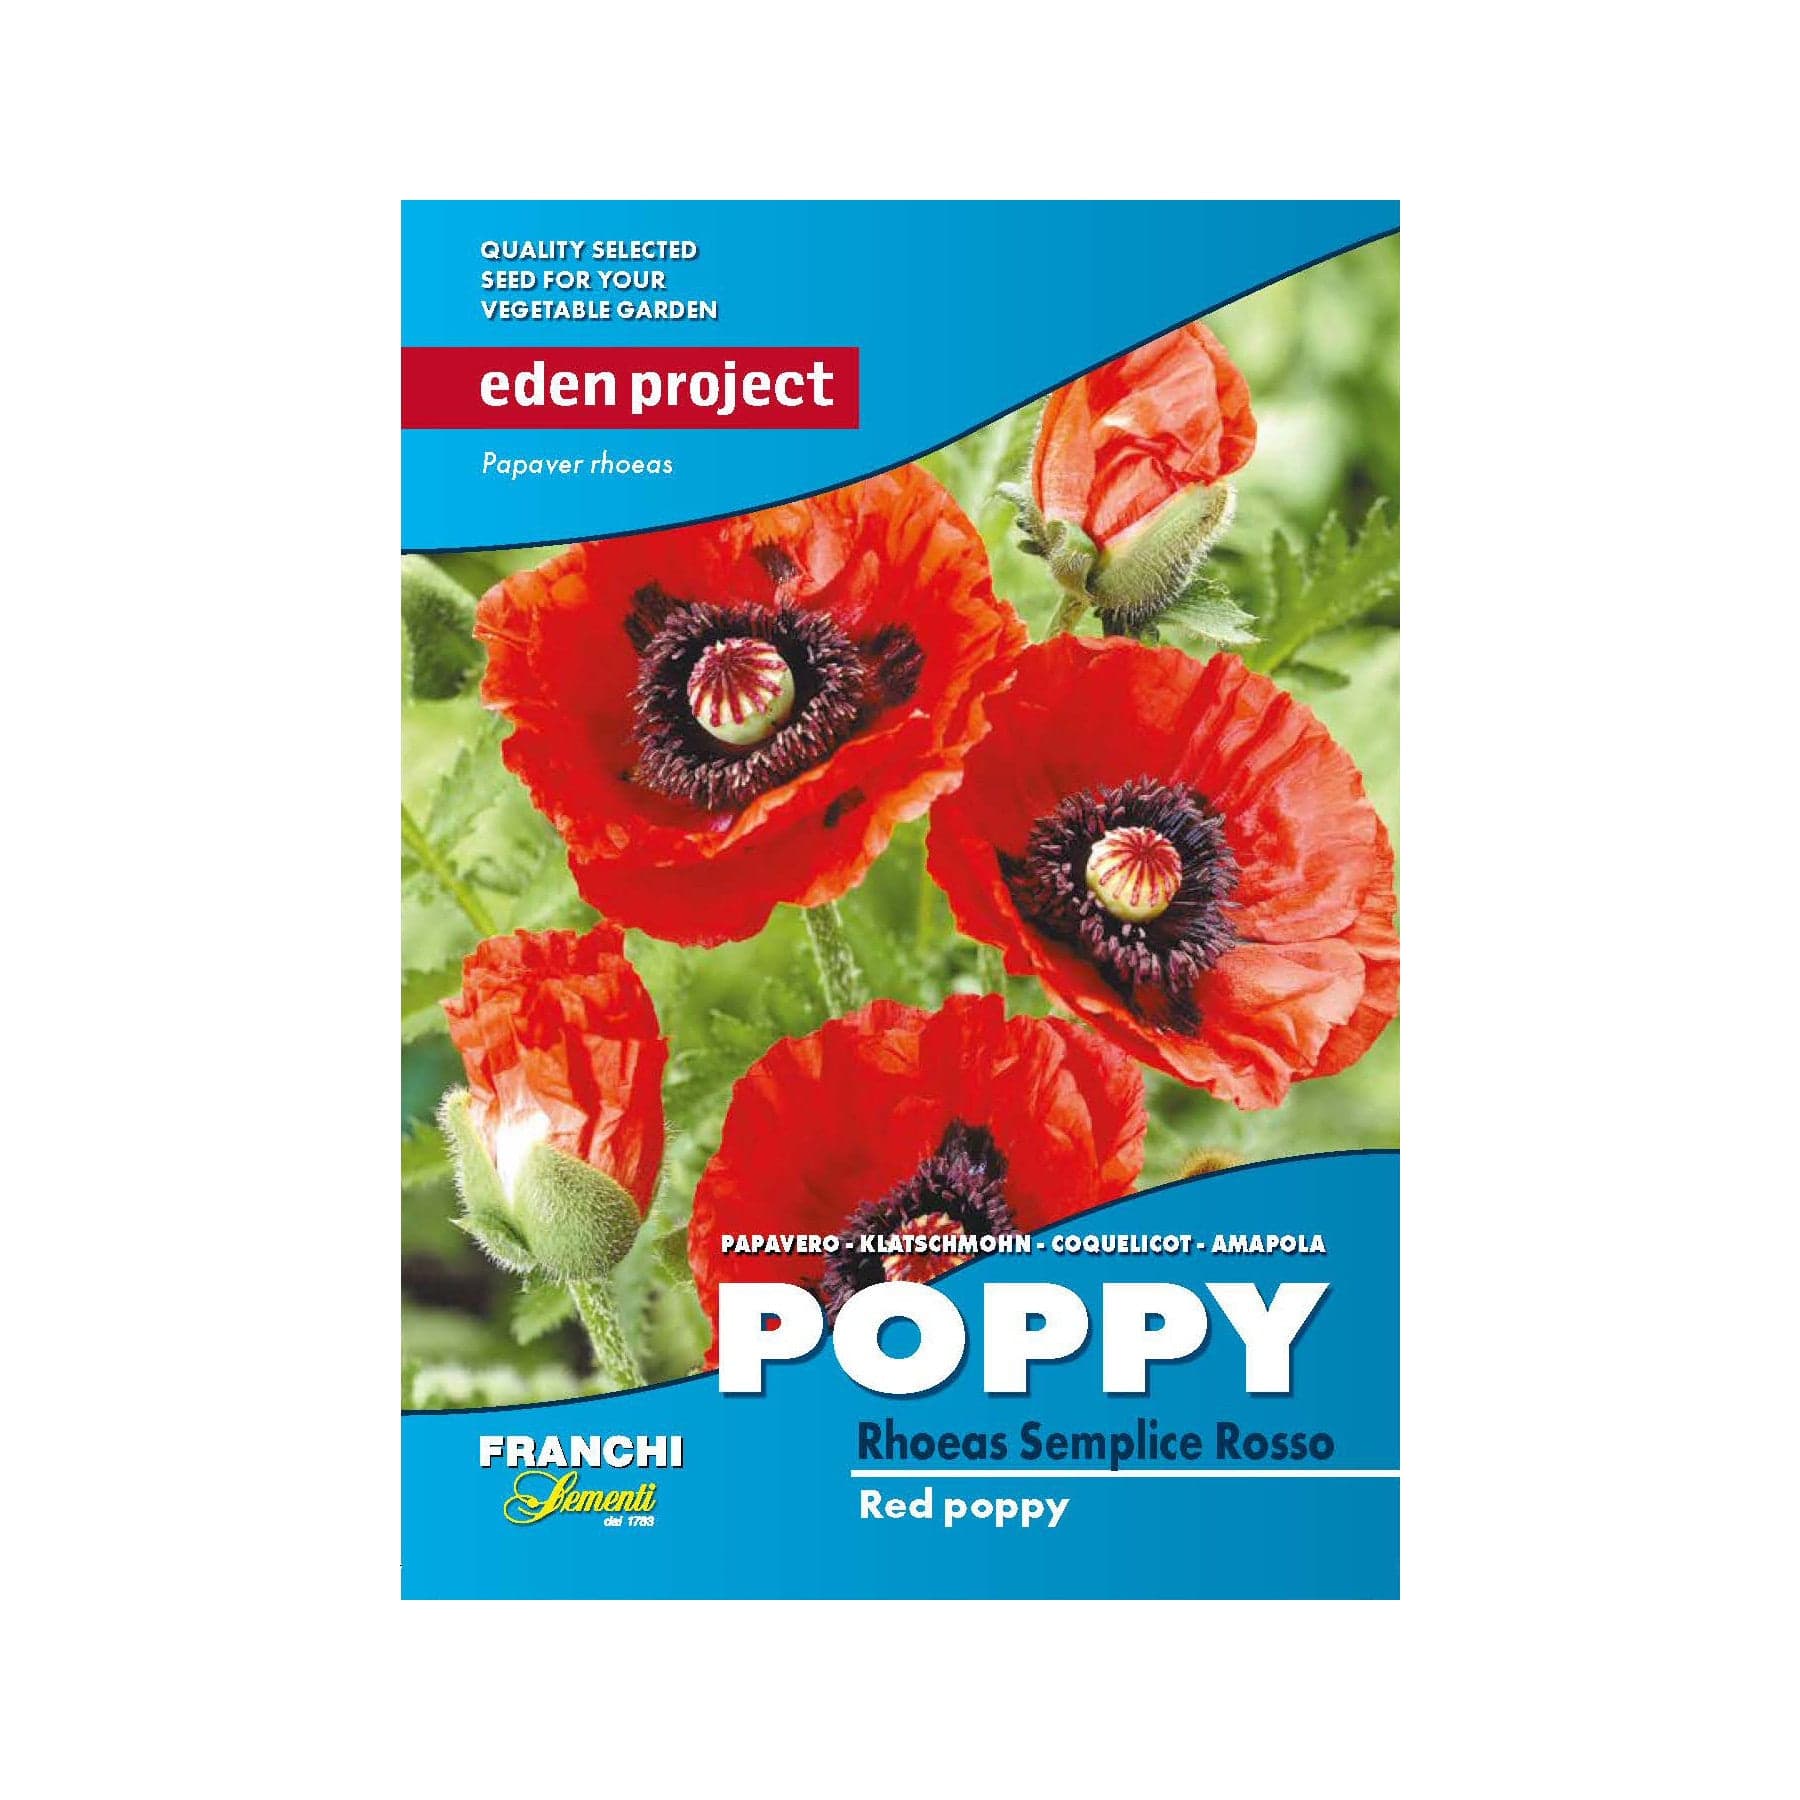 Eden Project Red Poppy Flower Seed Packet from Franchi Seeds, Papaver rhoeas Semplice Rosso, Quality Selected Seed for Vegetable Garden, vibrant red poppies with green foliage.